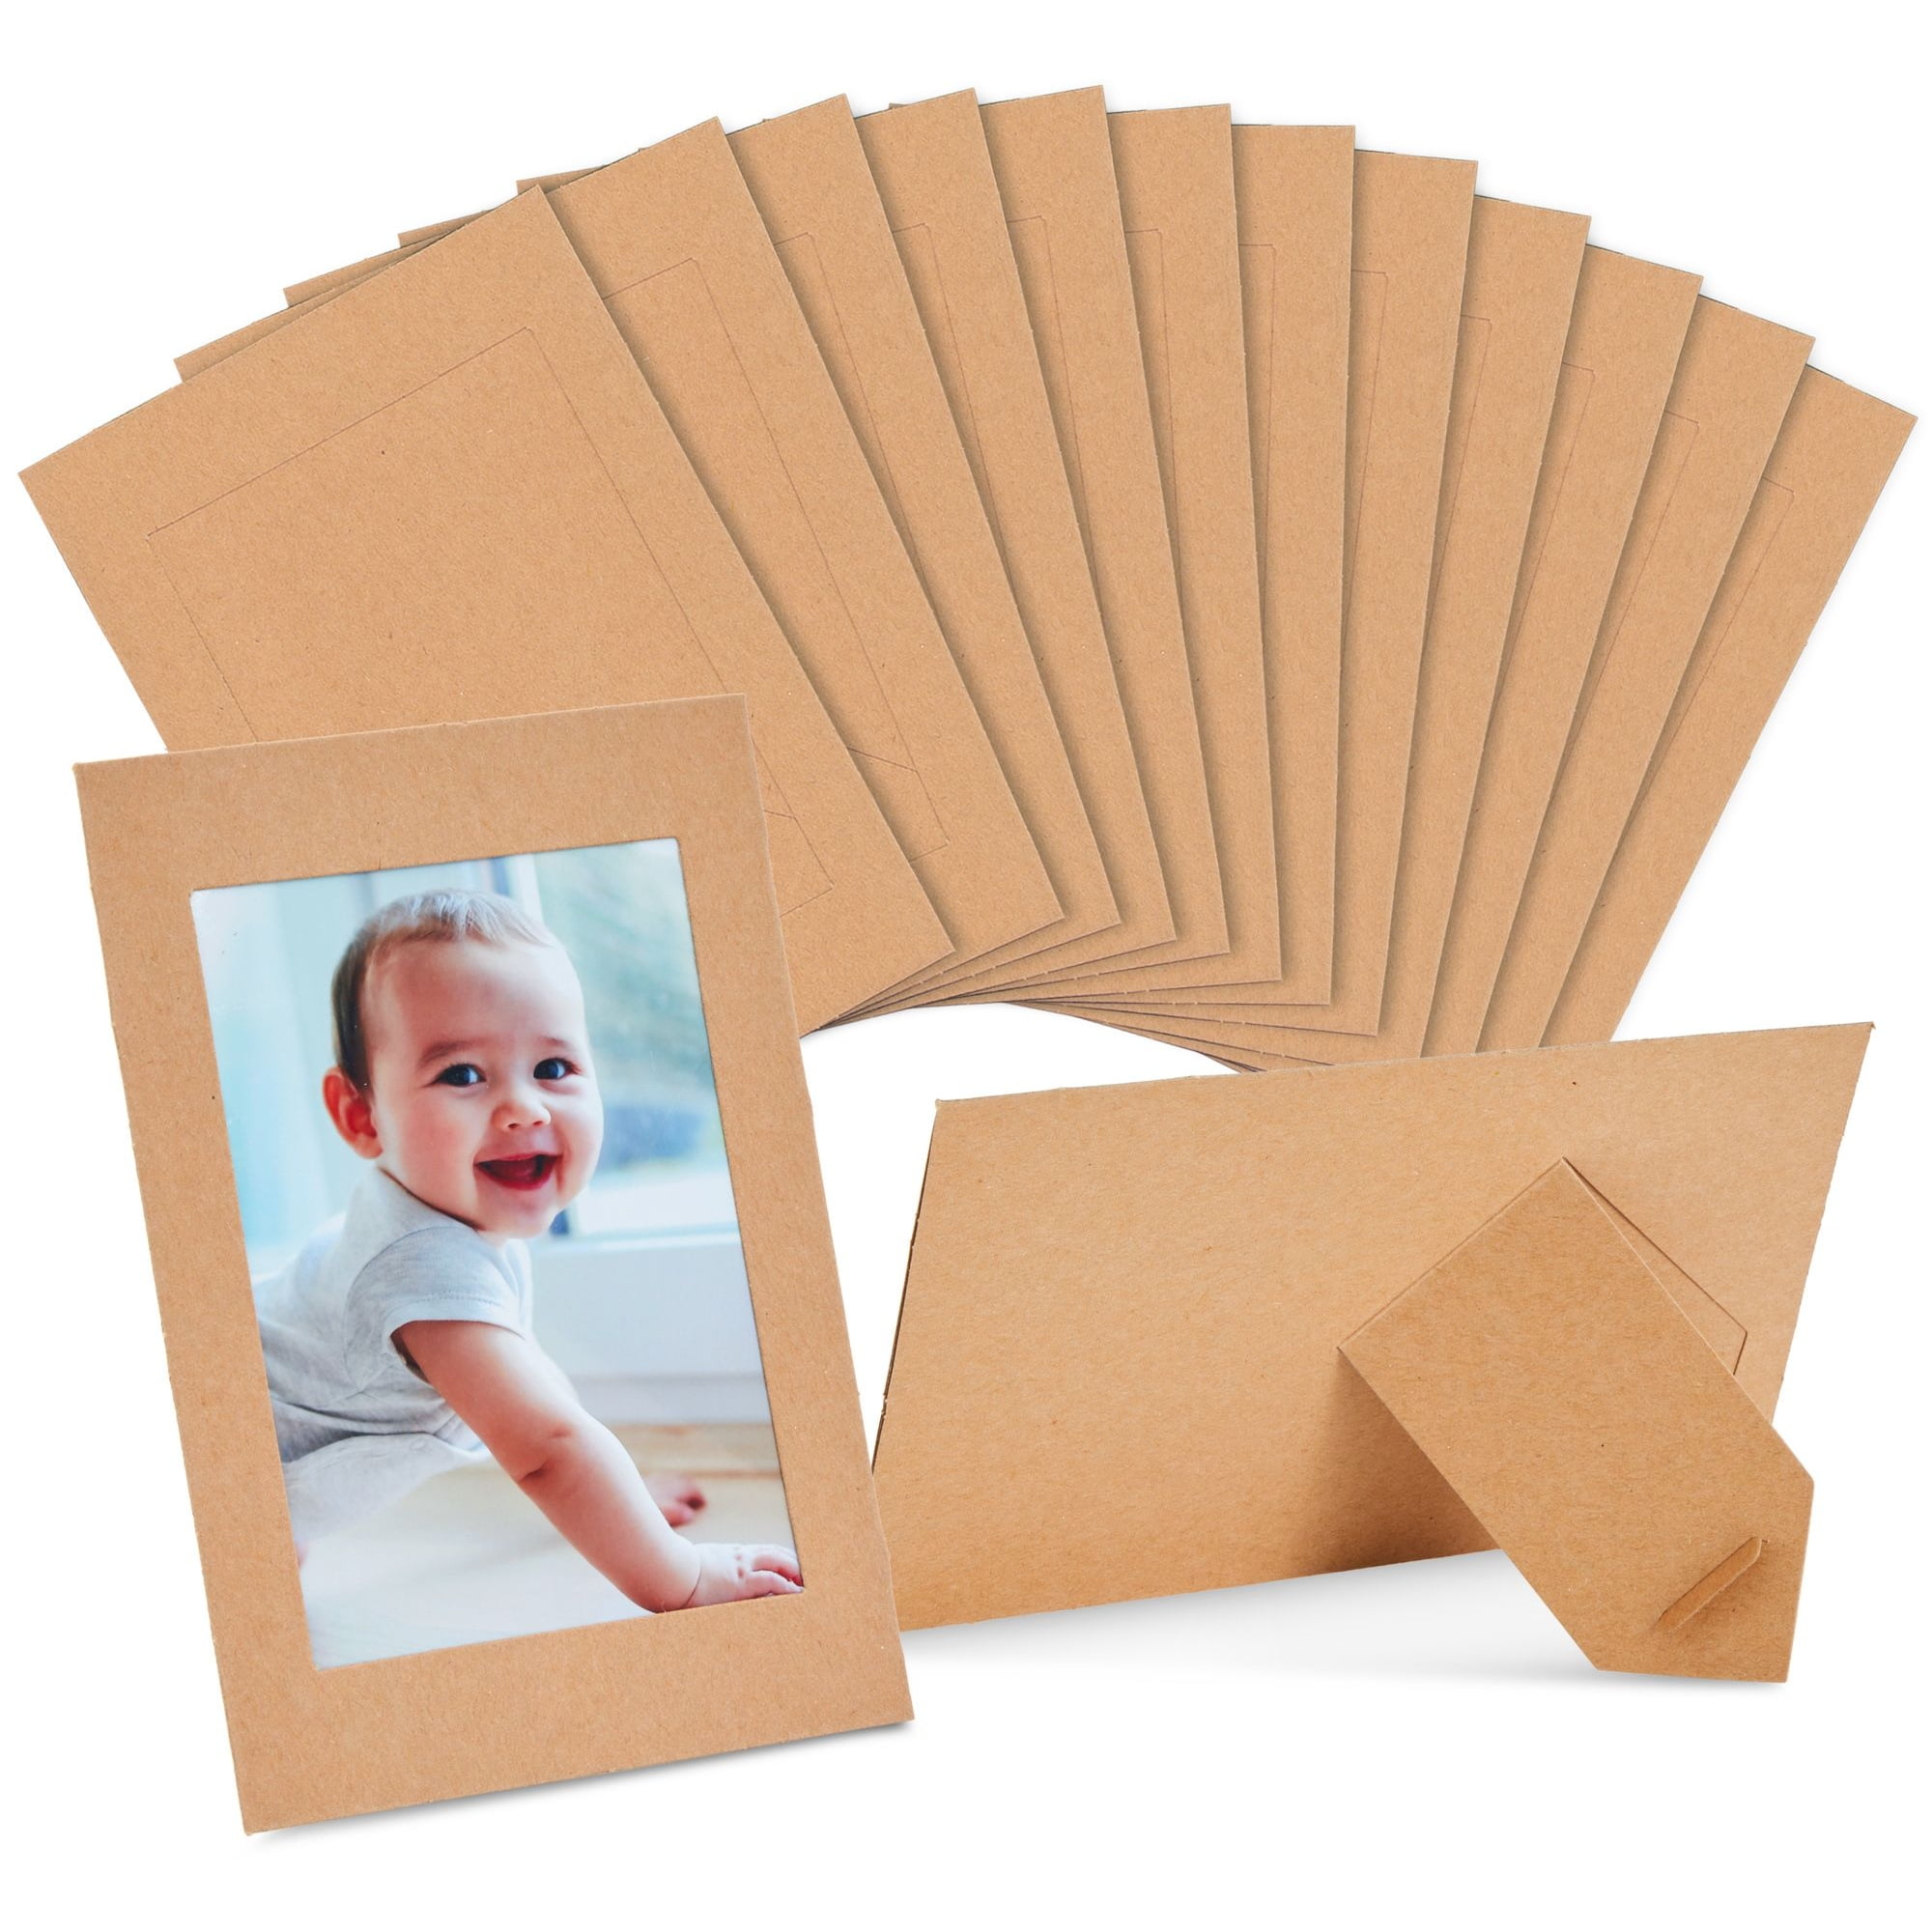 shisioct 100 Pack Paper Picture Frames 4x6, Cardboard Photo Frames with  Easel, 2 Way Display Standing Paper Frames, Bulk Picture Frames for Kids  DIY